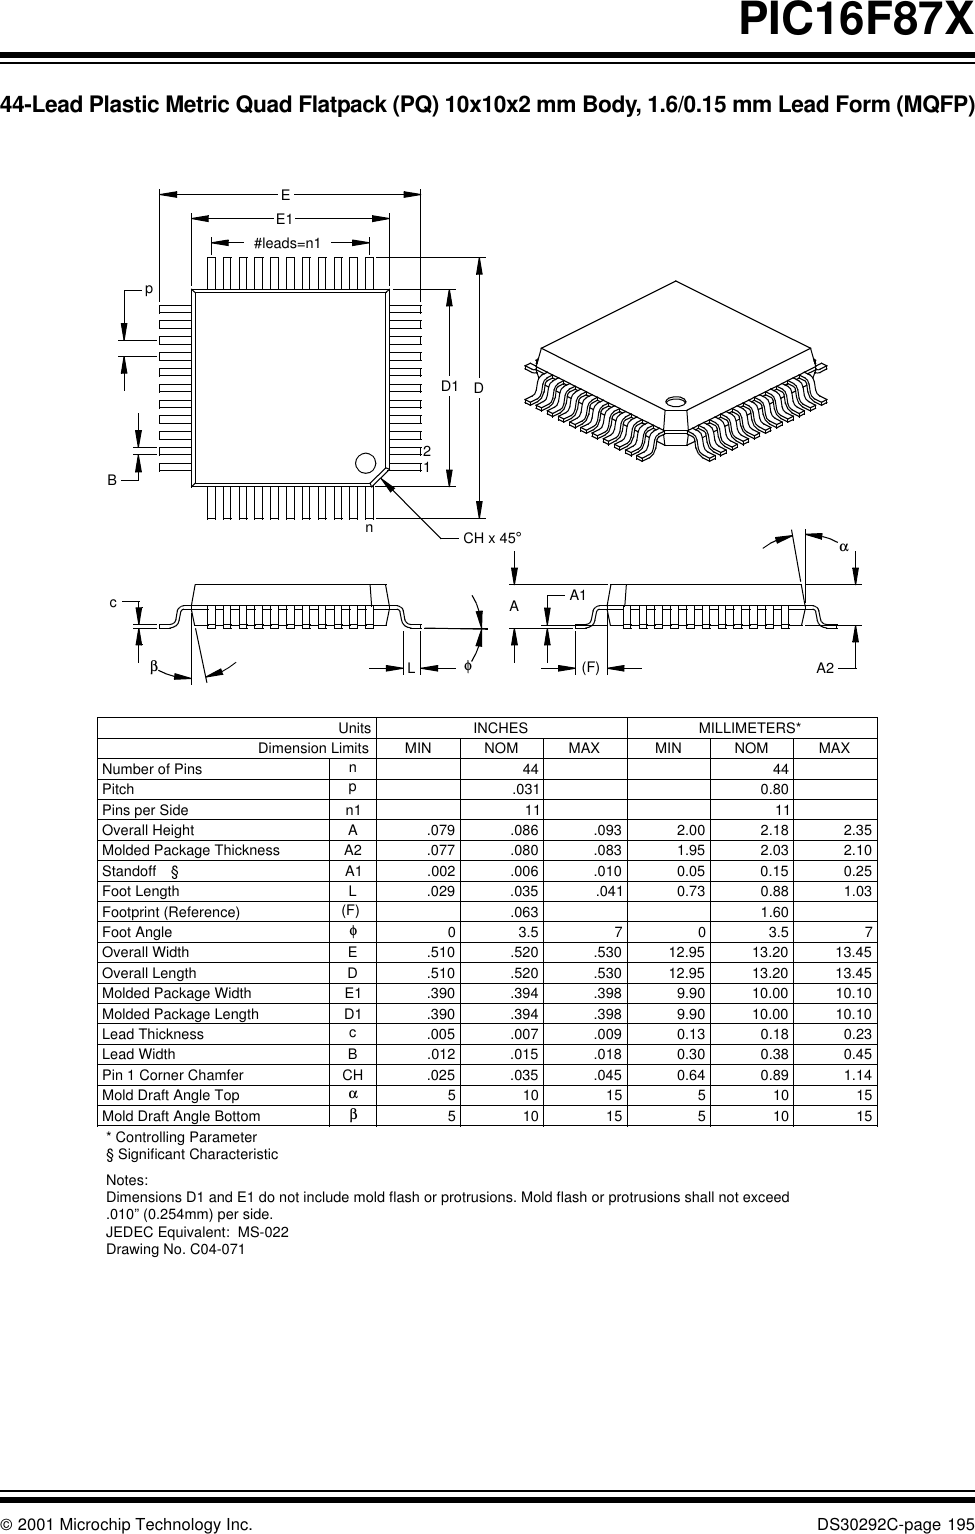  2001 Microchip Technology Inc. DS30292C-page 195PIC16F87X44-Lead Plastic Metric Quad Flatpack (PQ) 10x10x2 mm Body, 1.6/0.15 mm Lead Form (MQFP)* Controlling ParameterNotes:Dimensions D1 and E1 do not include mold flash or protrusions. Mold flash or protrusions shall not exceed .010” (0.254mm) per side.JEDEC Equivalent:  MS-022Drawing No. C04-071BD1ECH1510515105βMold Draft Angle Bottom1510515105αMold Draft Angle Top0.450.380.30.018.015.012Lead Width0.230.180.13.009.007.005cLead Thickness1111n1Pins per Side10.1010.009.90.398.394.390Molded Package Length10.1010.009.90.398.394.390E1Molded Package Width13.4513.2012.95.530.520.510DOverall Length13.4513.2012.95.530.520.510Overall Width73.5073.50φFoot Angle1.030.880.73.041.035.029LFoot Length0.250.150.05.010.006.002A1Standoff §2.102.031.95.083.080.077A2Molded Package Thickness2.35.093AOverall Height0.80.031pPitch4444nNumber of PinsMAXNOMMINMAXNOMMINDimension LimitsMILLIMETERS*INCHESUnits21nD1 DBpEE1#leads=n1cβφαA2ACH x 45°LPin 1 Corner ChamferFootprint (Reference) (F)  .063 1.60.025 .035 .045 0.64 0.89 1.14(F)A1.079 .086 2.00 2.18§ Significant Characteristic